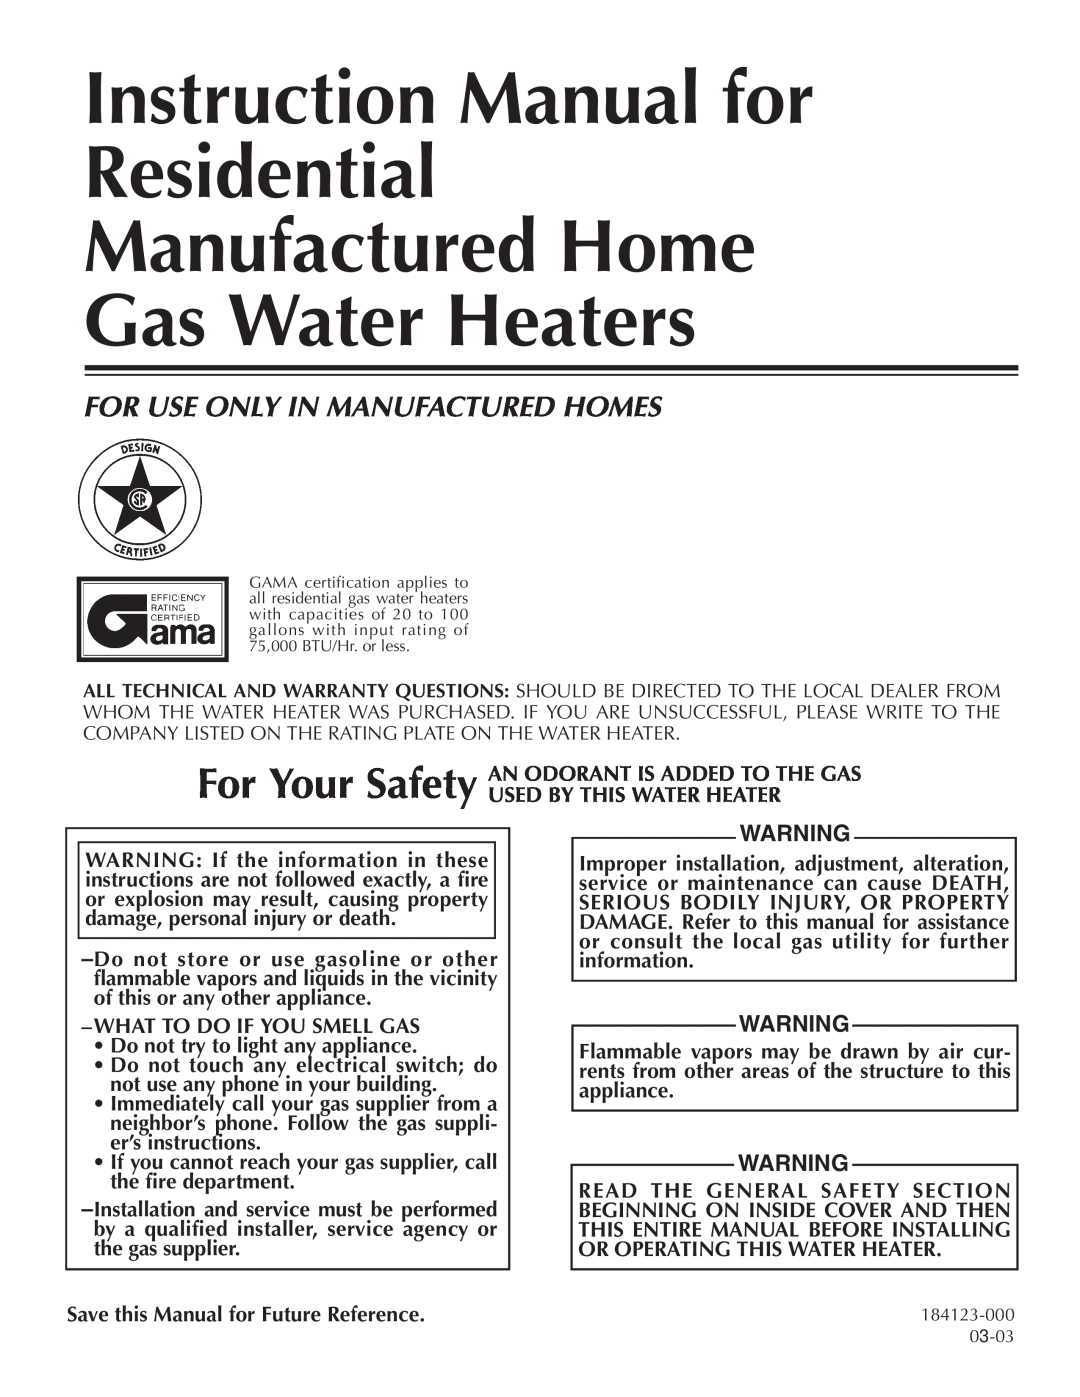 Reliance Water Heaters 184123-000 instruction manual For Use Only In Manufactured Homes 